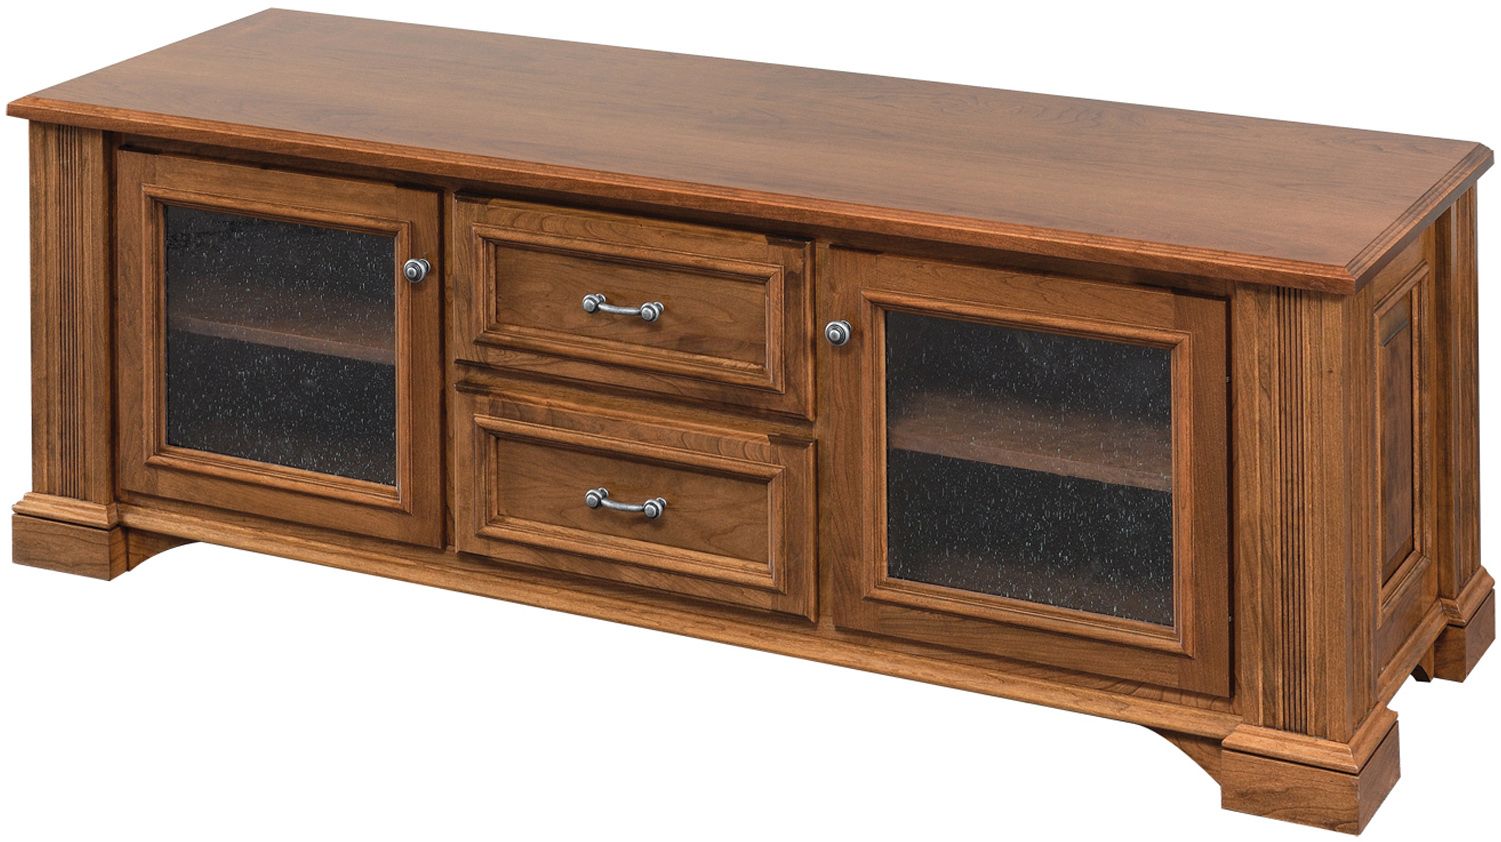 Lincoln Deluxe Plasma Tv Stand | Amish Solid Hardwood Tv Pertaining To Cabinet Tv Stands (View 7 of 15)